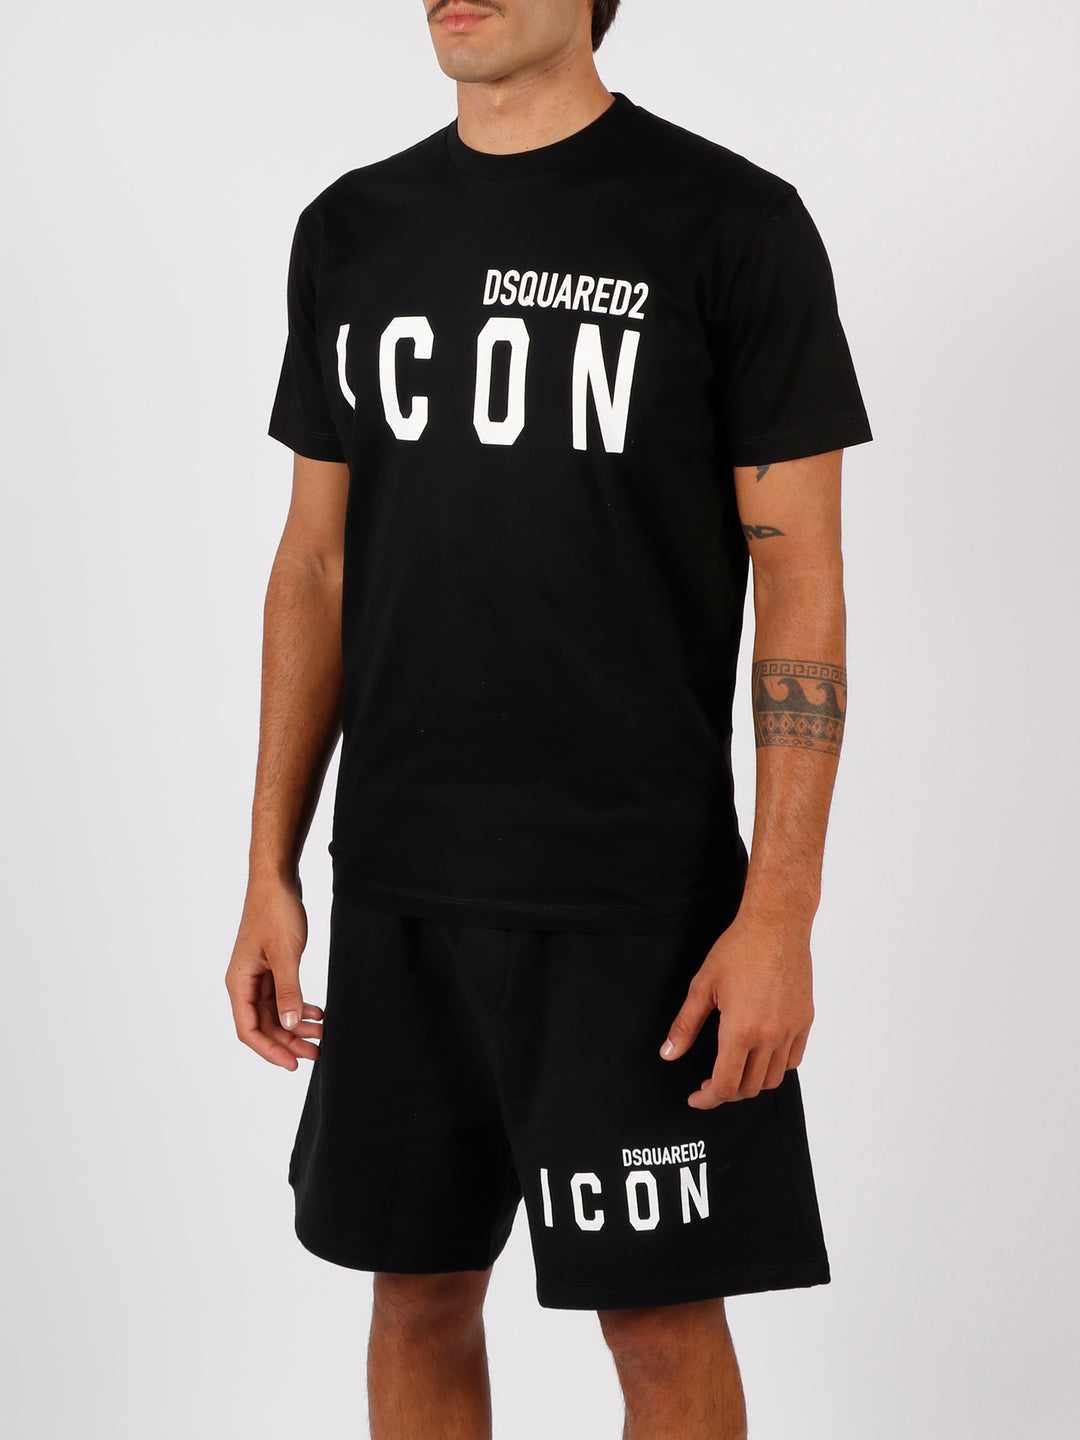 Be icon cool t-shirt